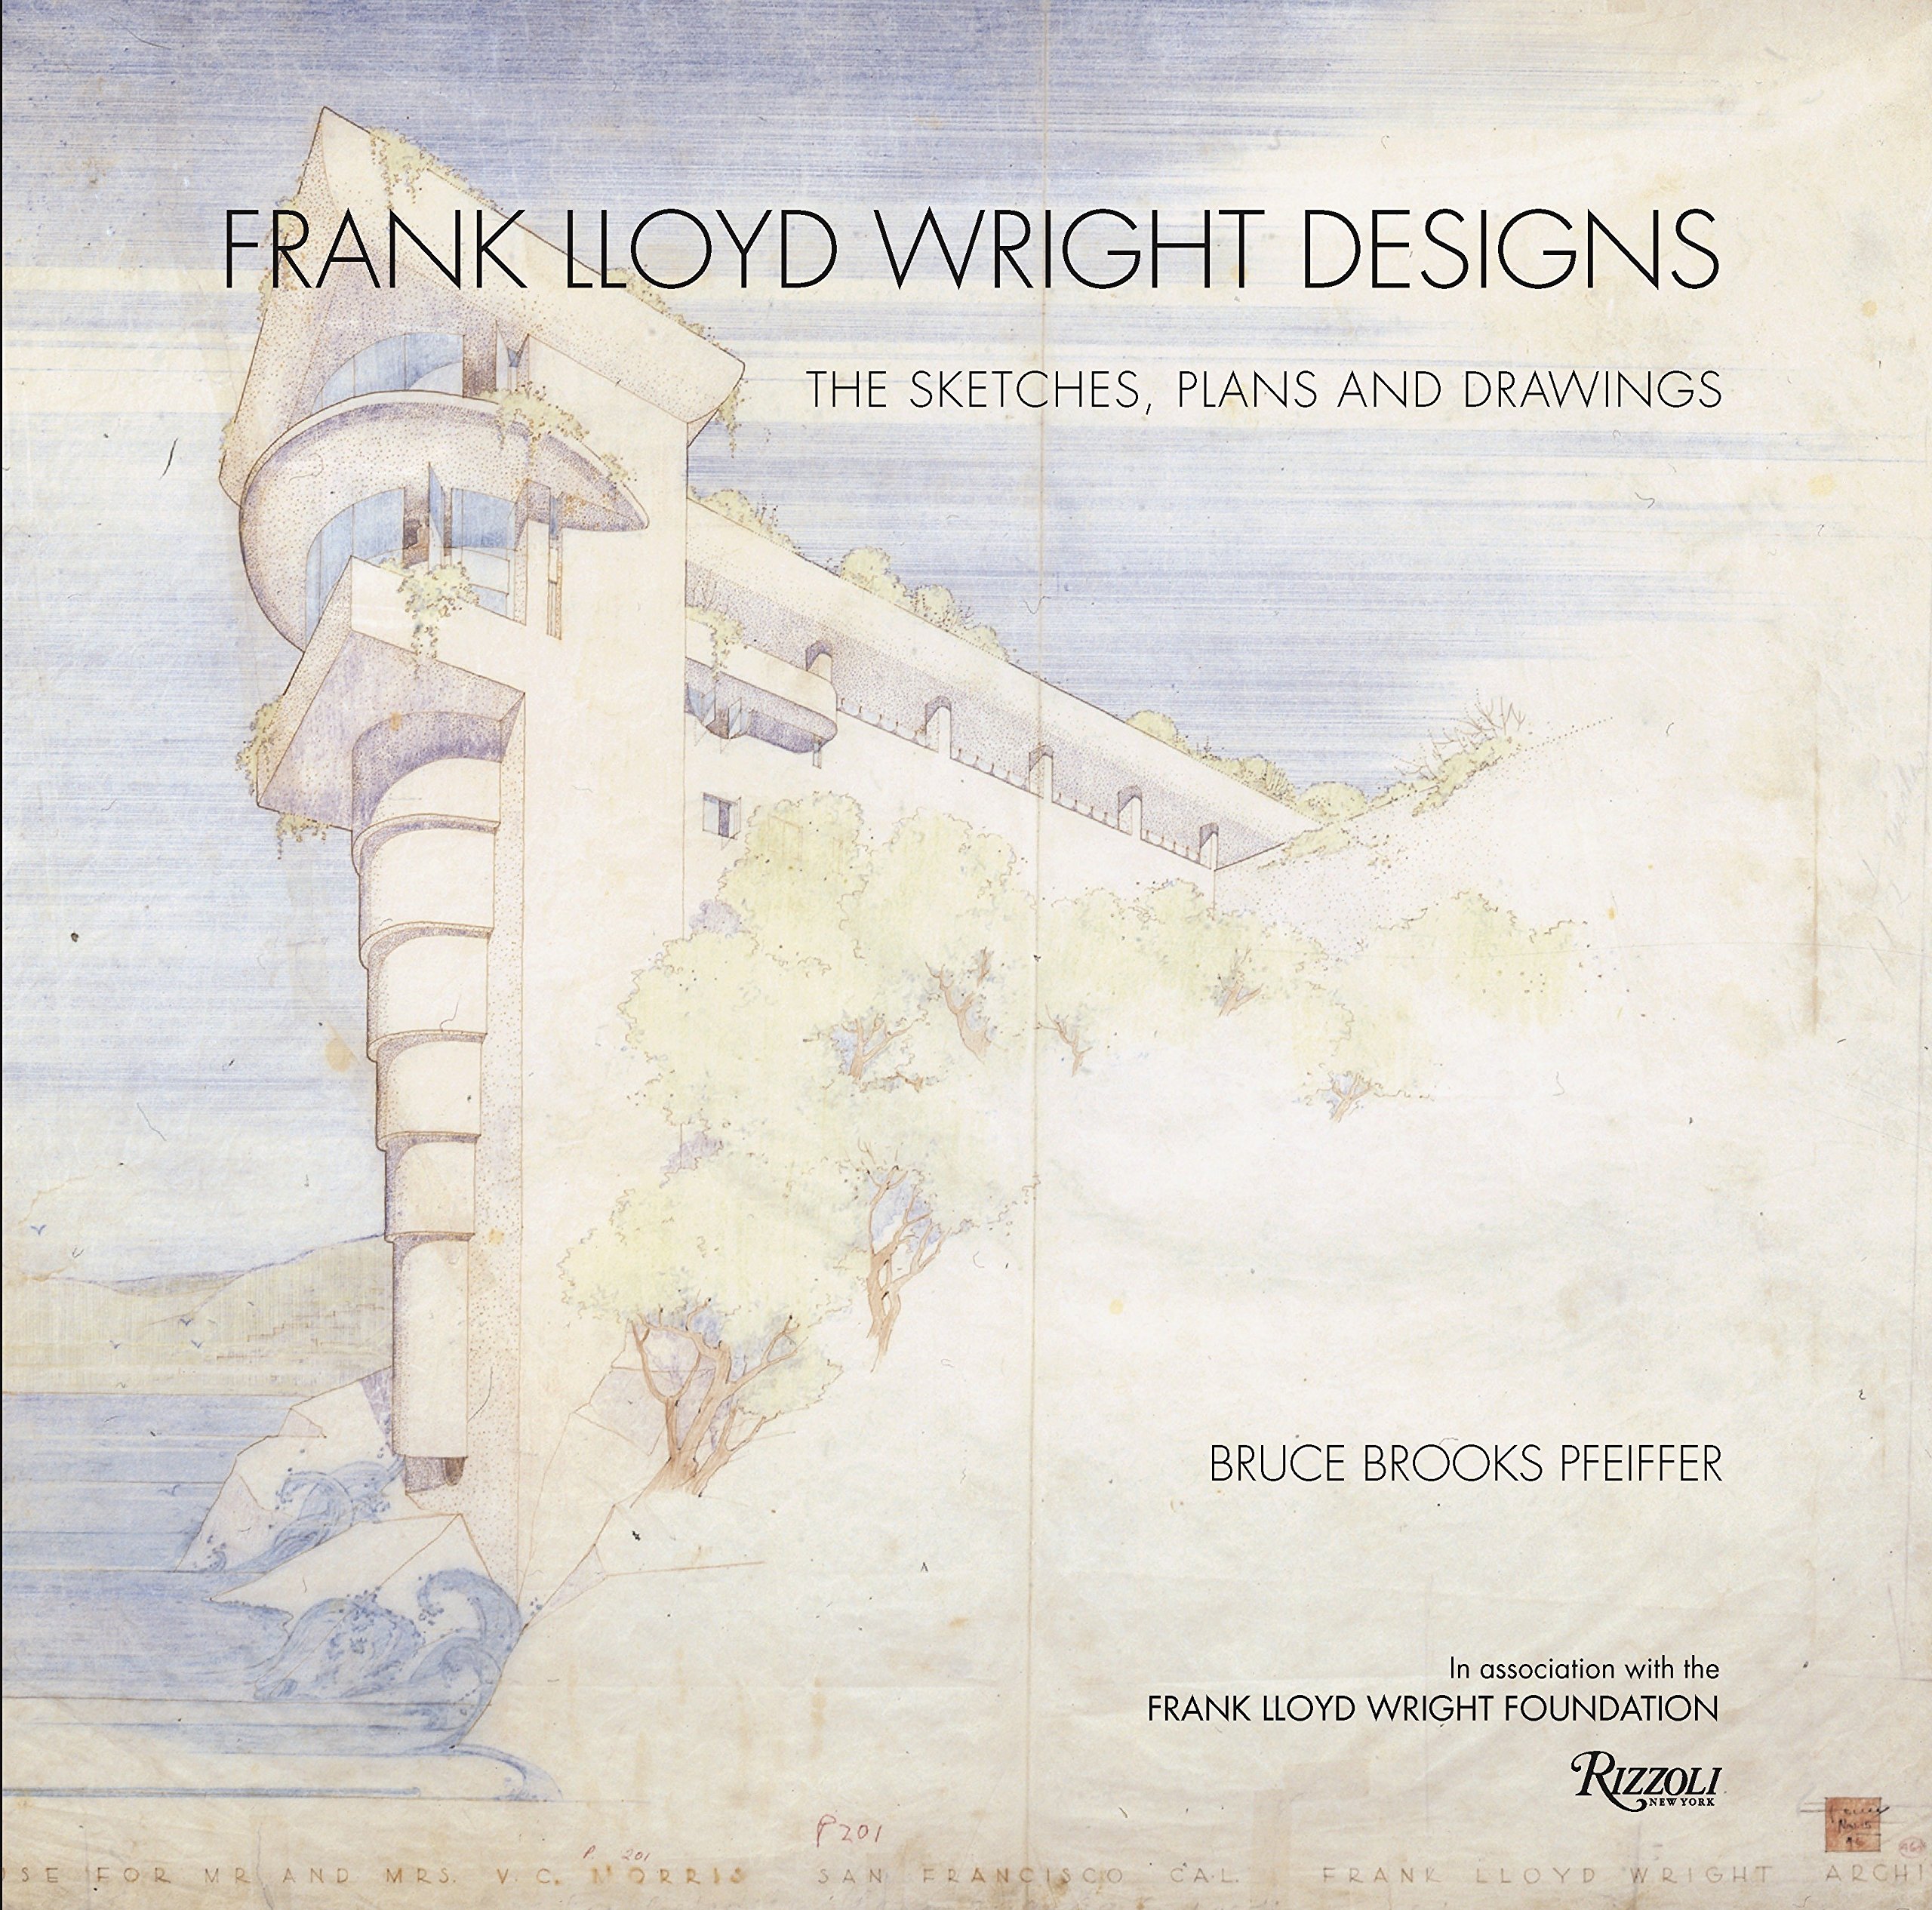 Frank Lloyd Wright Drawings at Explore collection